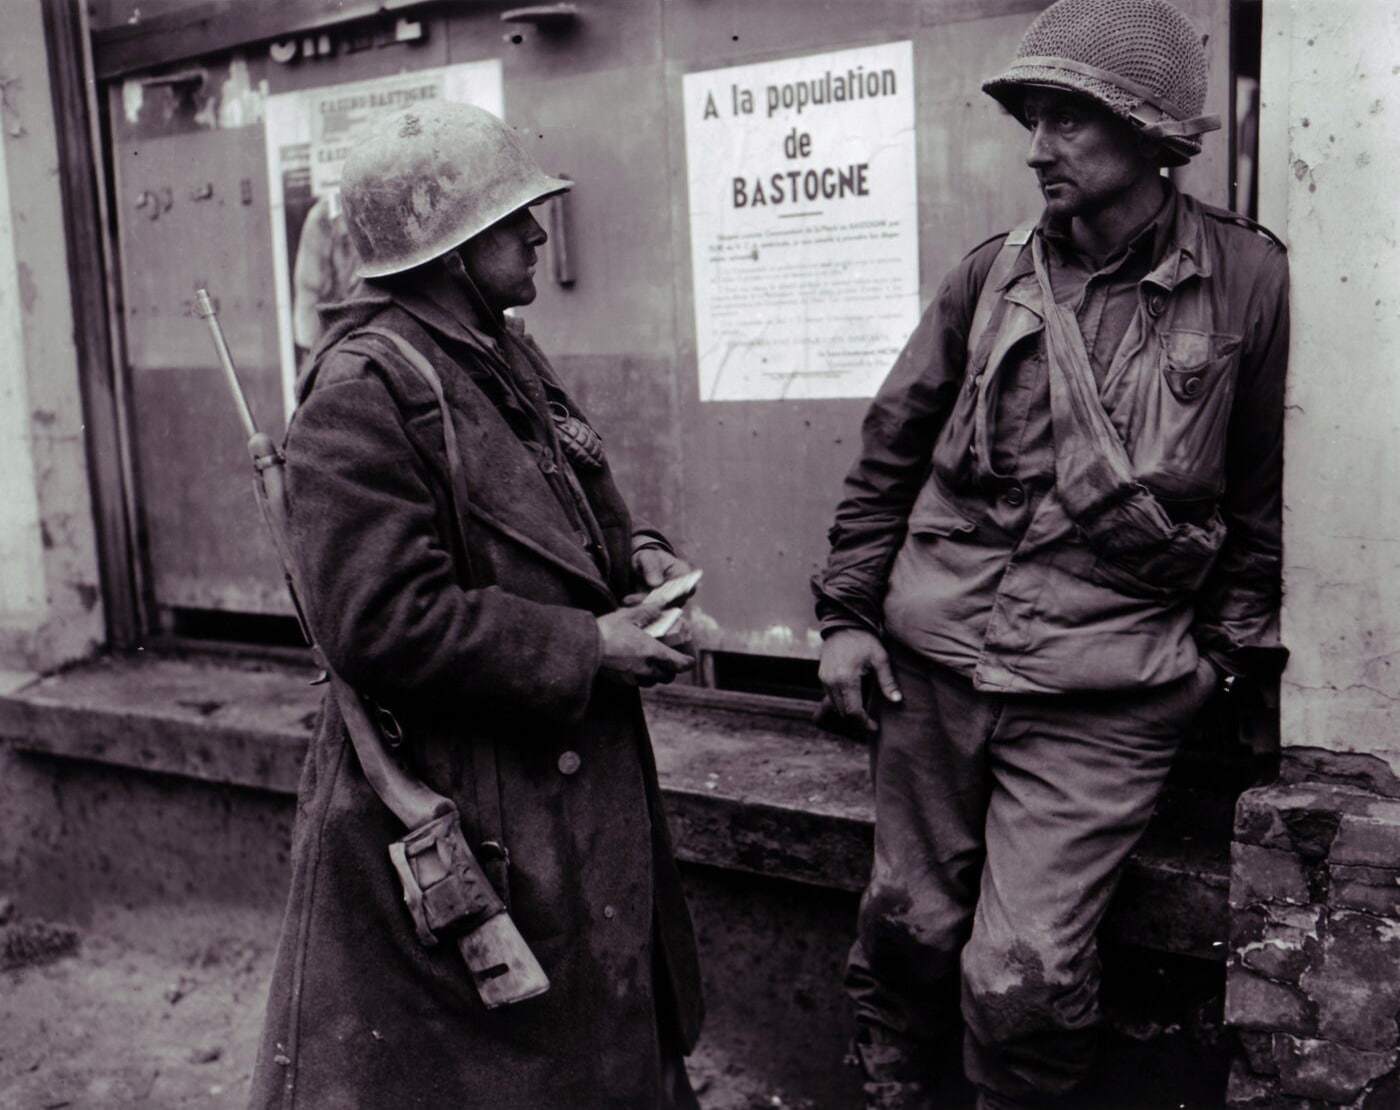 M1 Carbine carried in Bastogne during the Battle of the Bulge